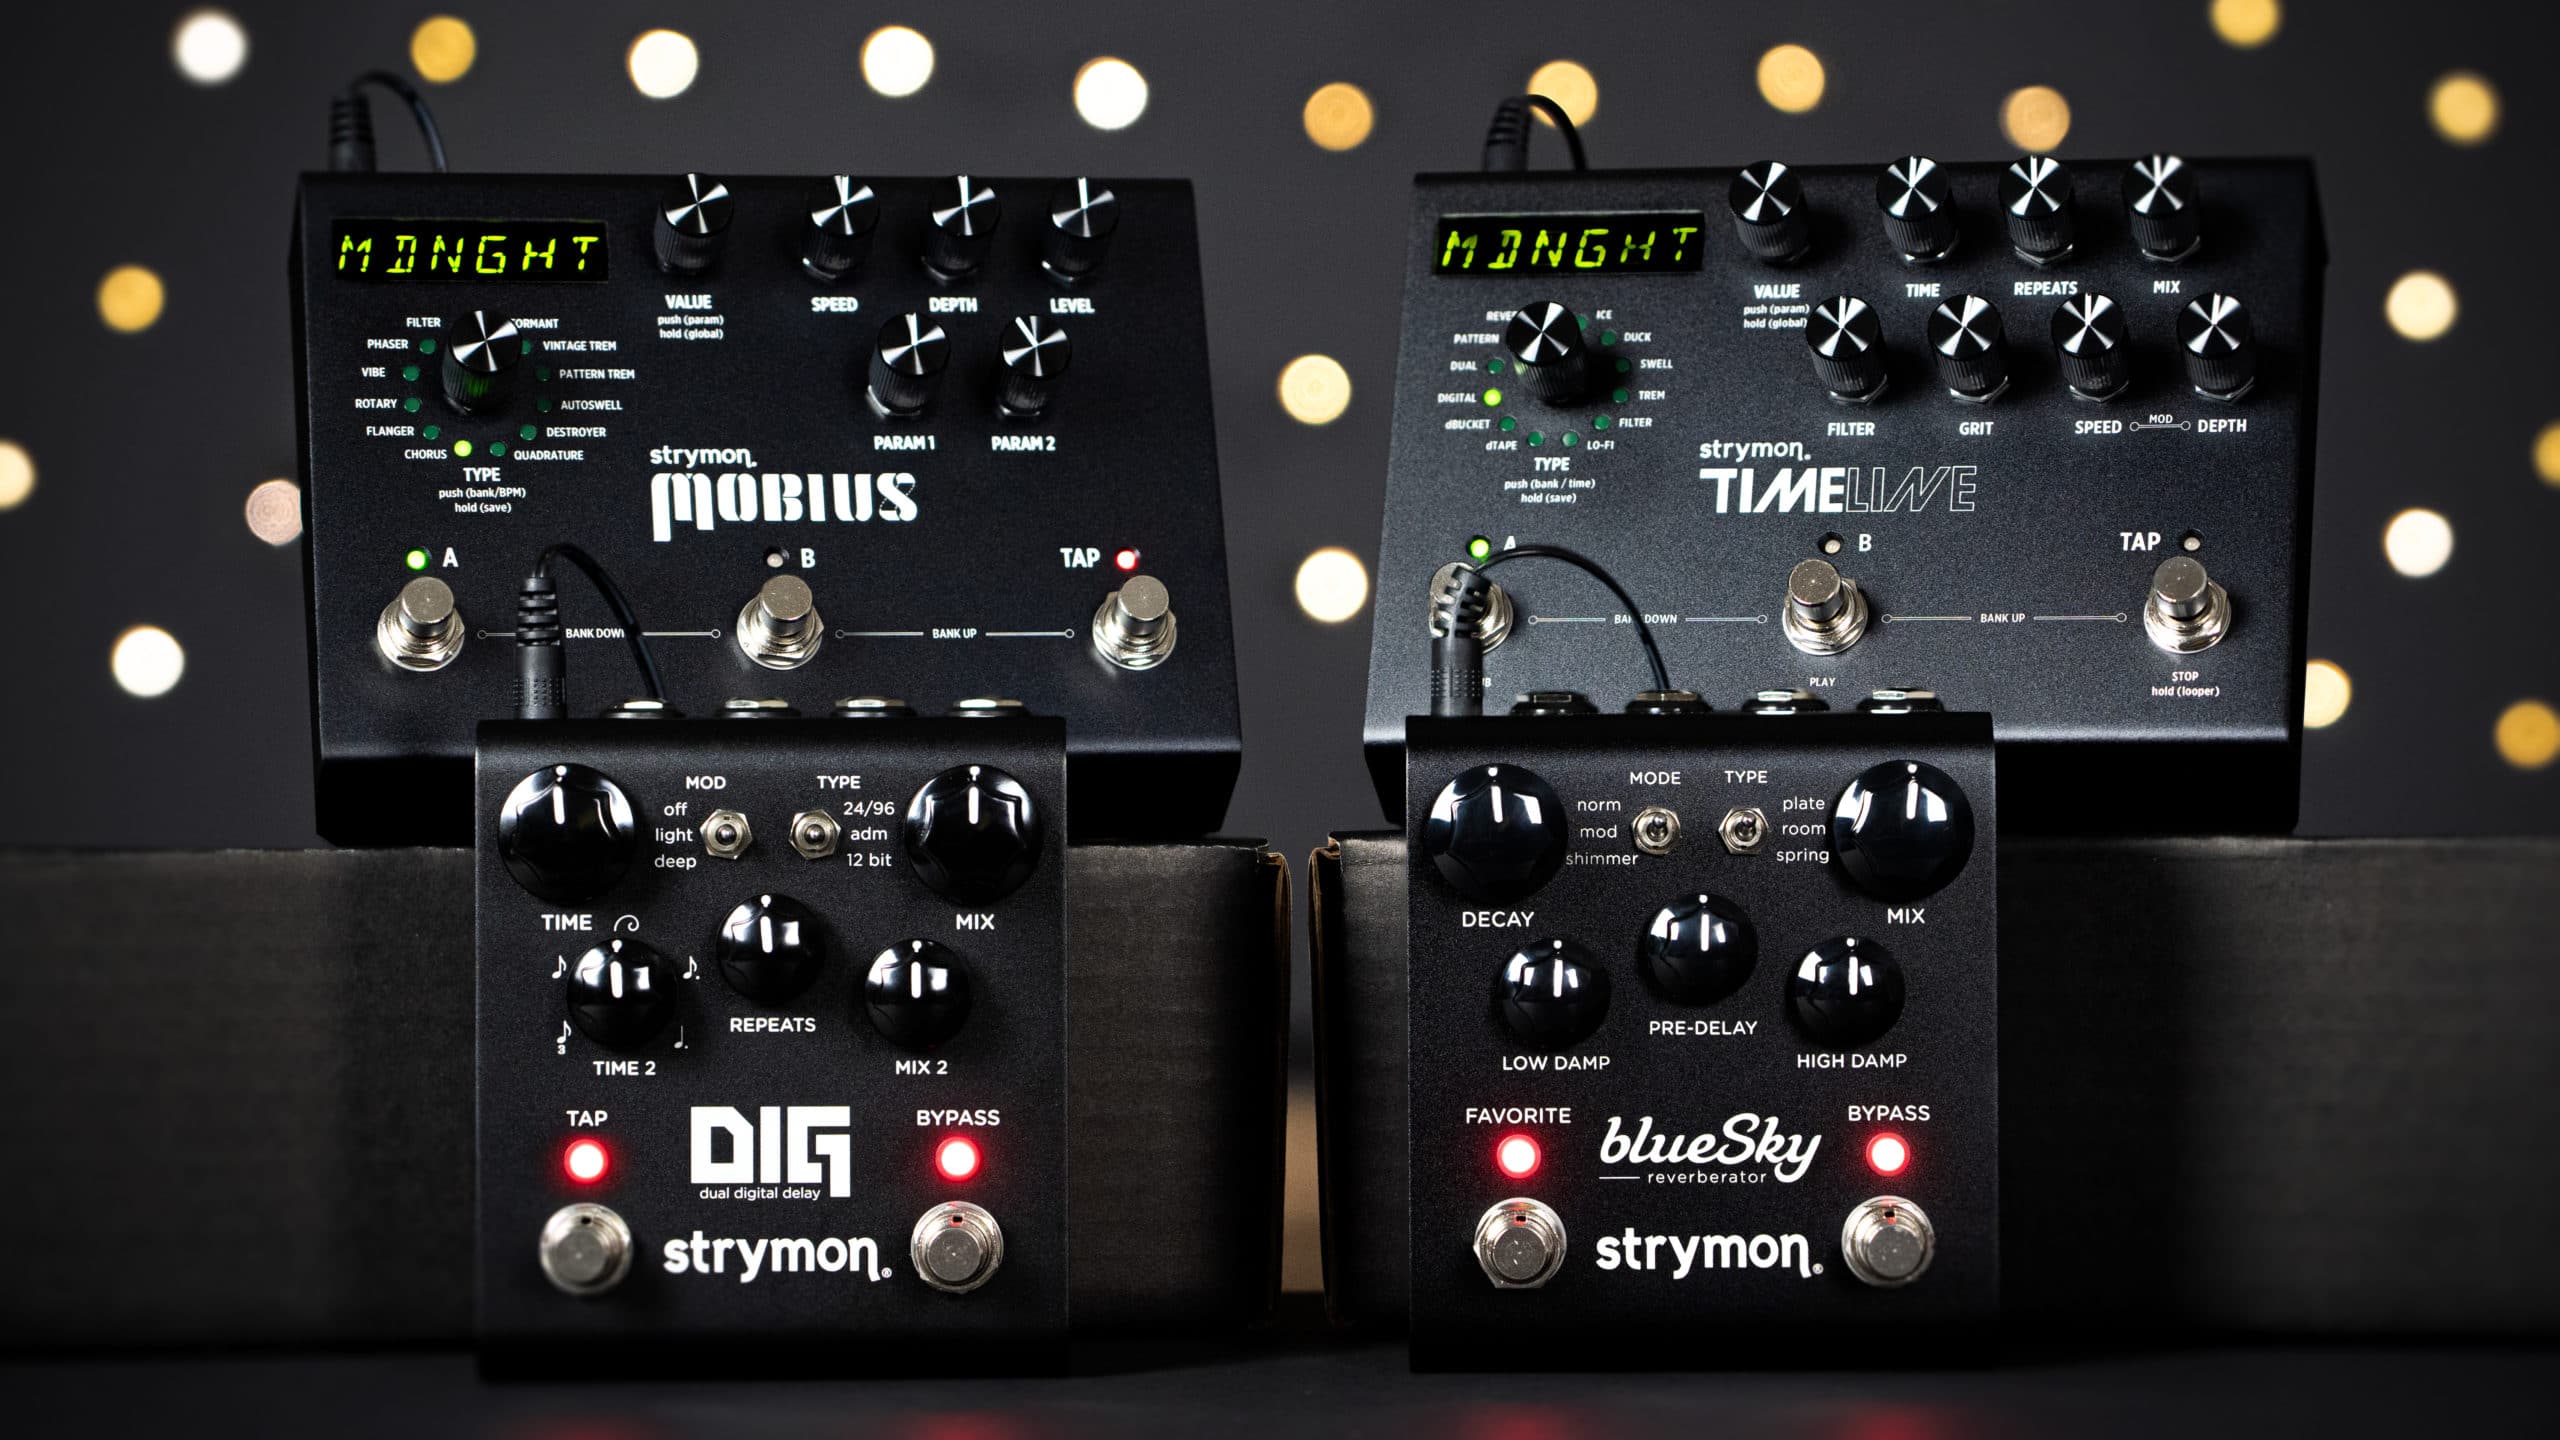 Strymon Midnight Edition Second Drop Pedals — TimeLine, Mobius, blueSky, DIG